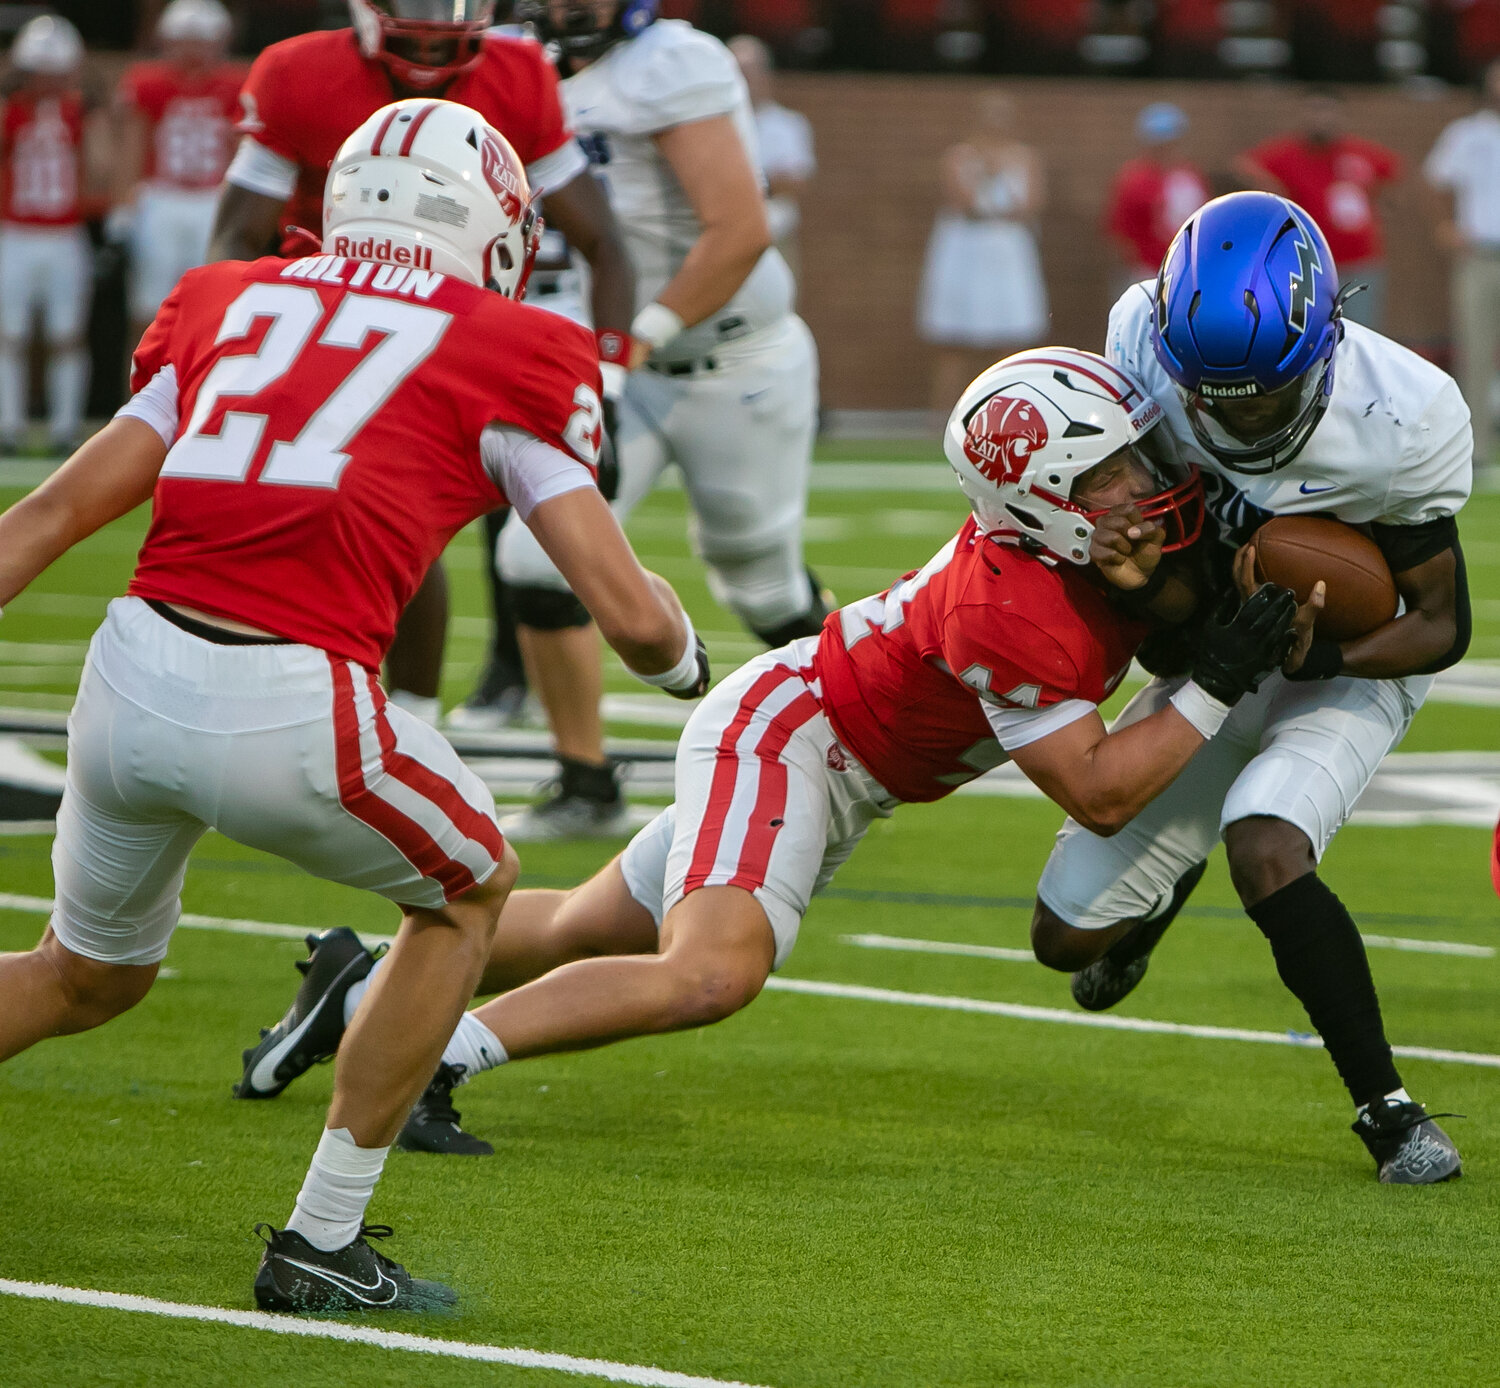 Connor Johnsey takes down a Clear Springs player during Saturday's game between Katy and Clear Springs at Rhodes Stadium.